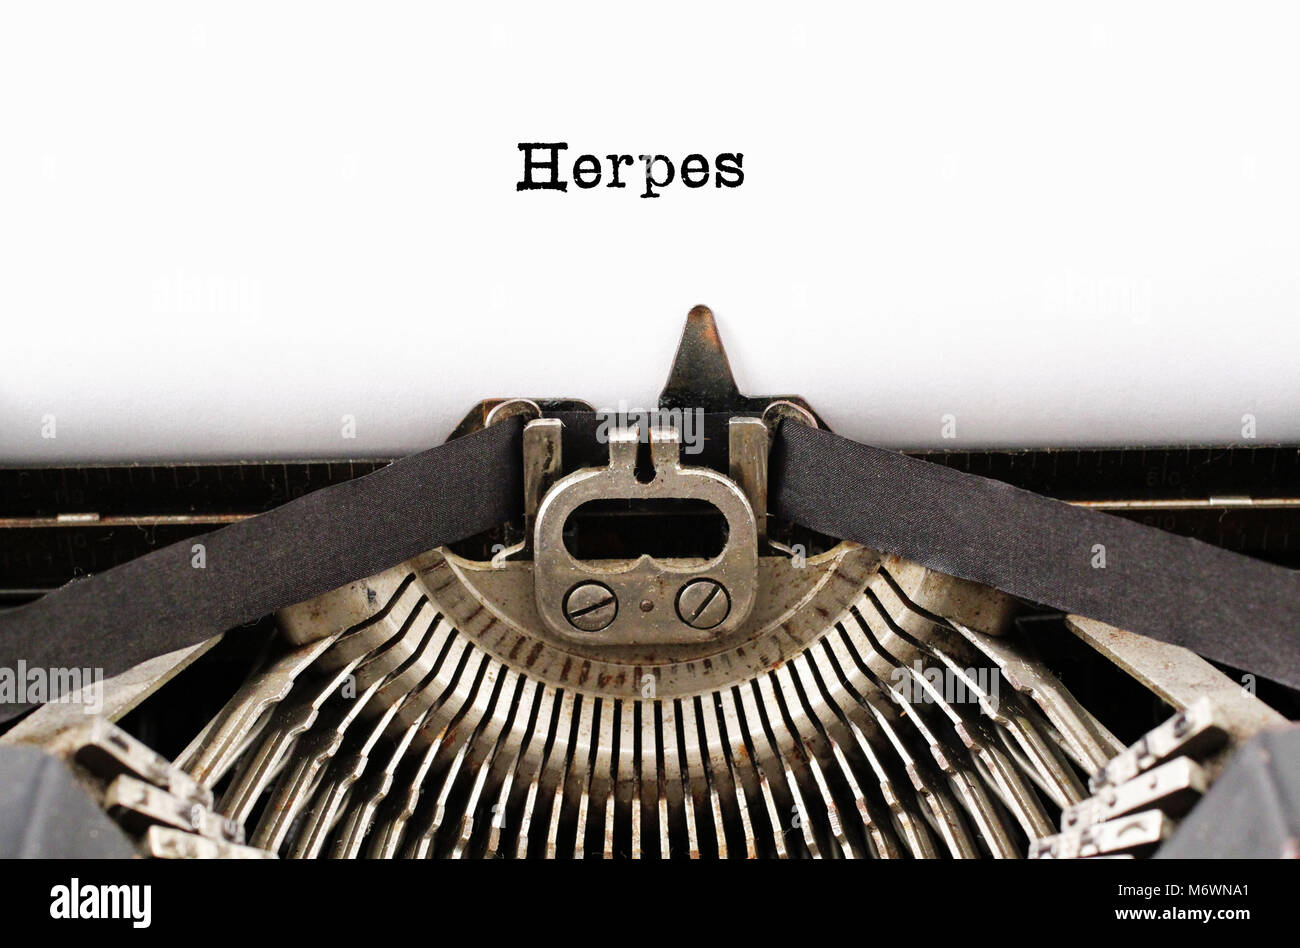 The word Herpes from a typewriter on a white background Stock Photo